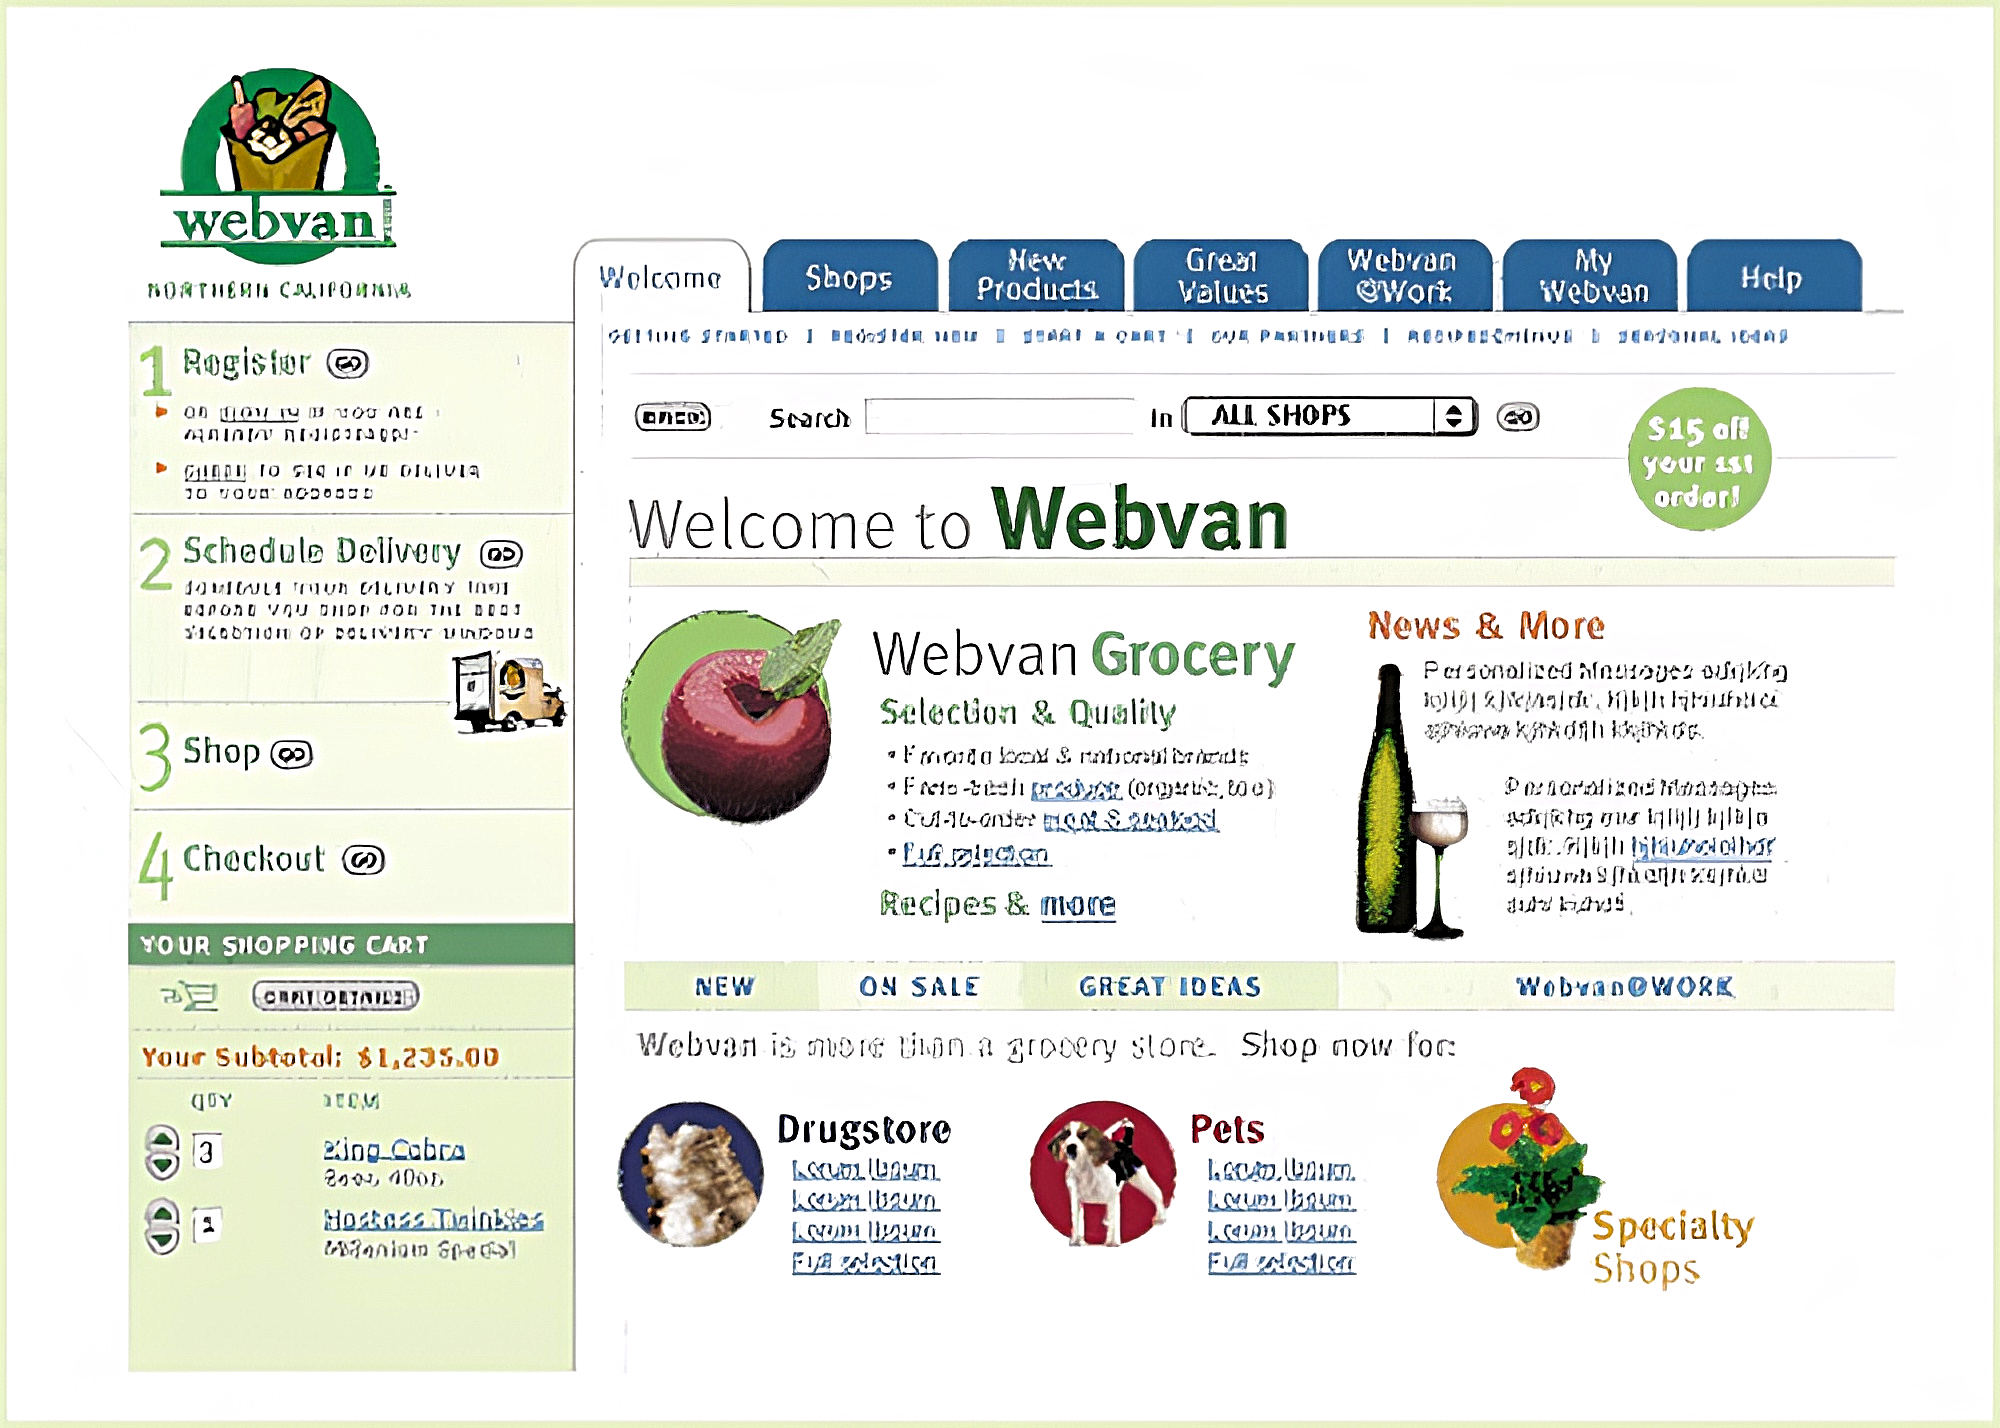 Louis Borders founded Webvan as an online grocery store.